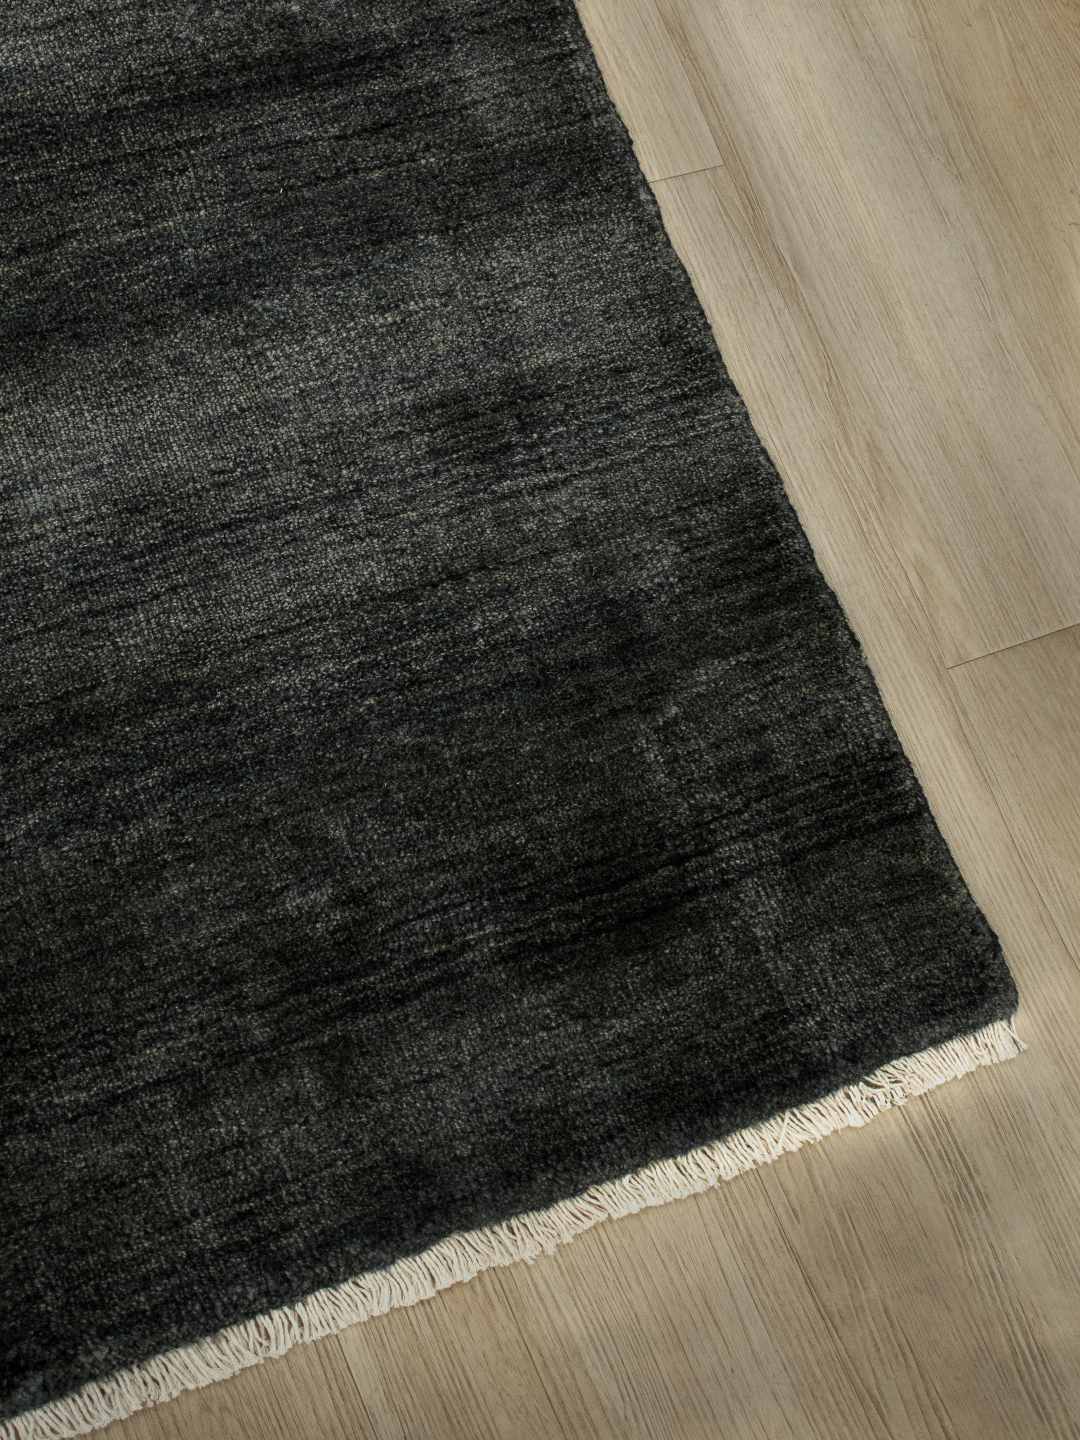 Adore Rug Oolong Rug 20% off from the Rug Collection Stockist Make Your House A Home, Furniture Store Bendigo. Free Australia Wide Delivery